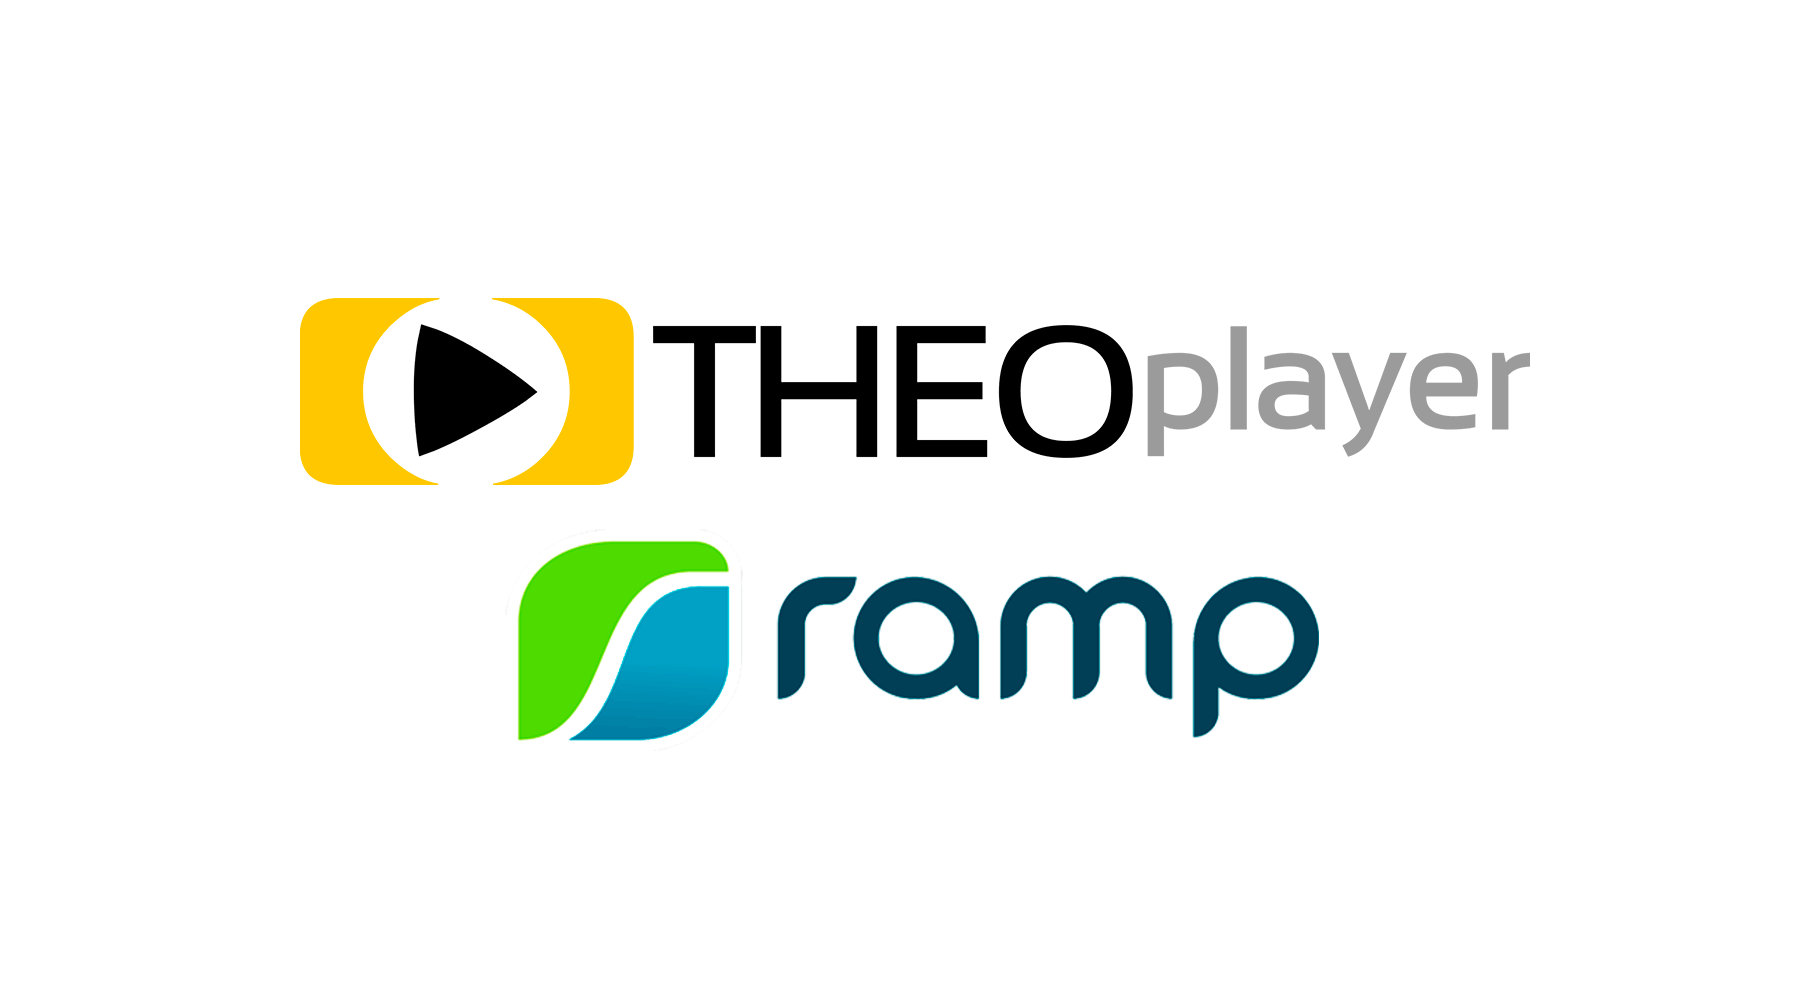 Ramp and THEOplayer team up to simplify the video streaming delivery